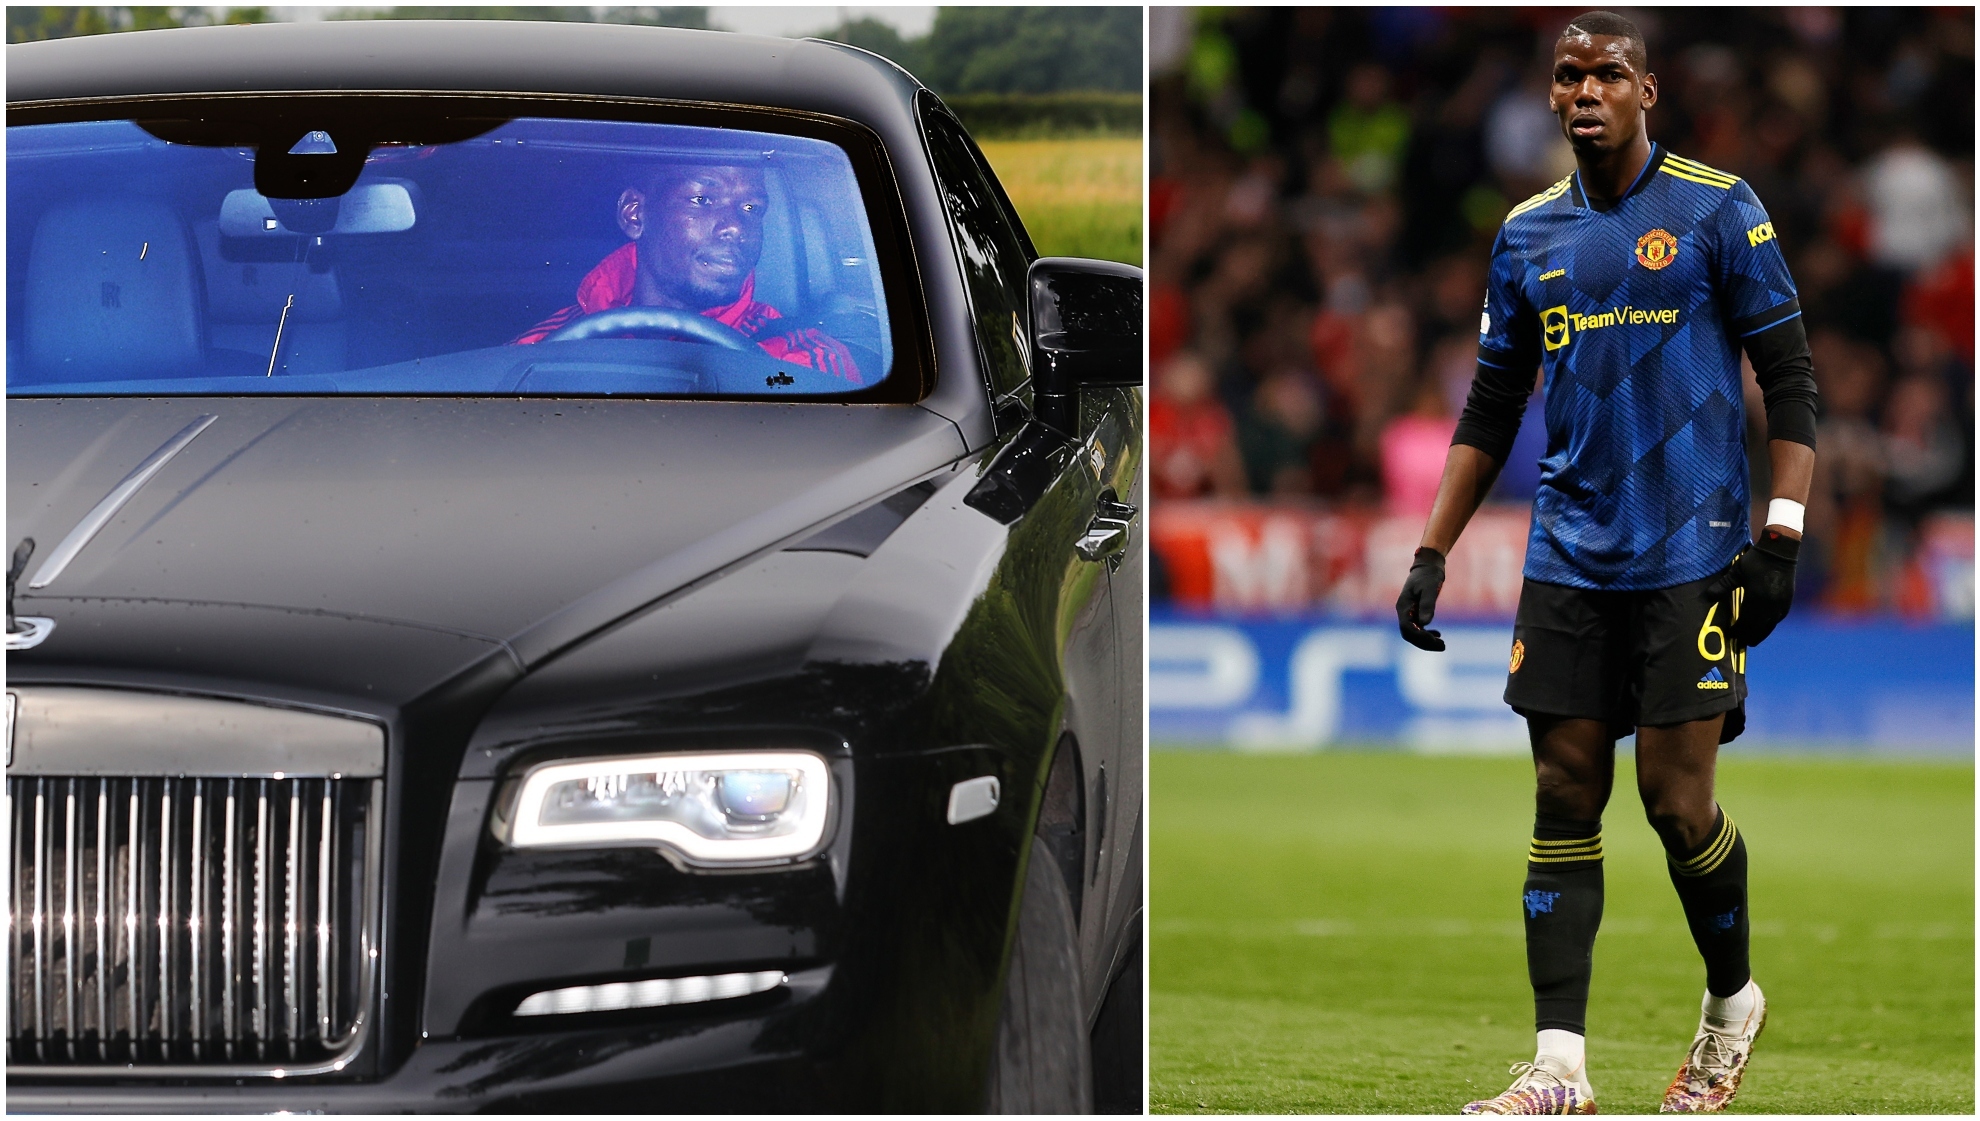 Pogba's extravagance: Manchester United offered him 350,000 euros a week and he rejected them from a Rolls-Royce